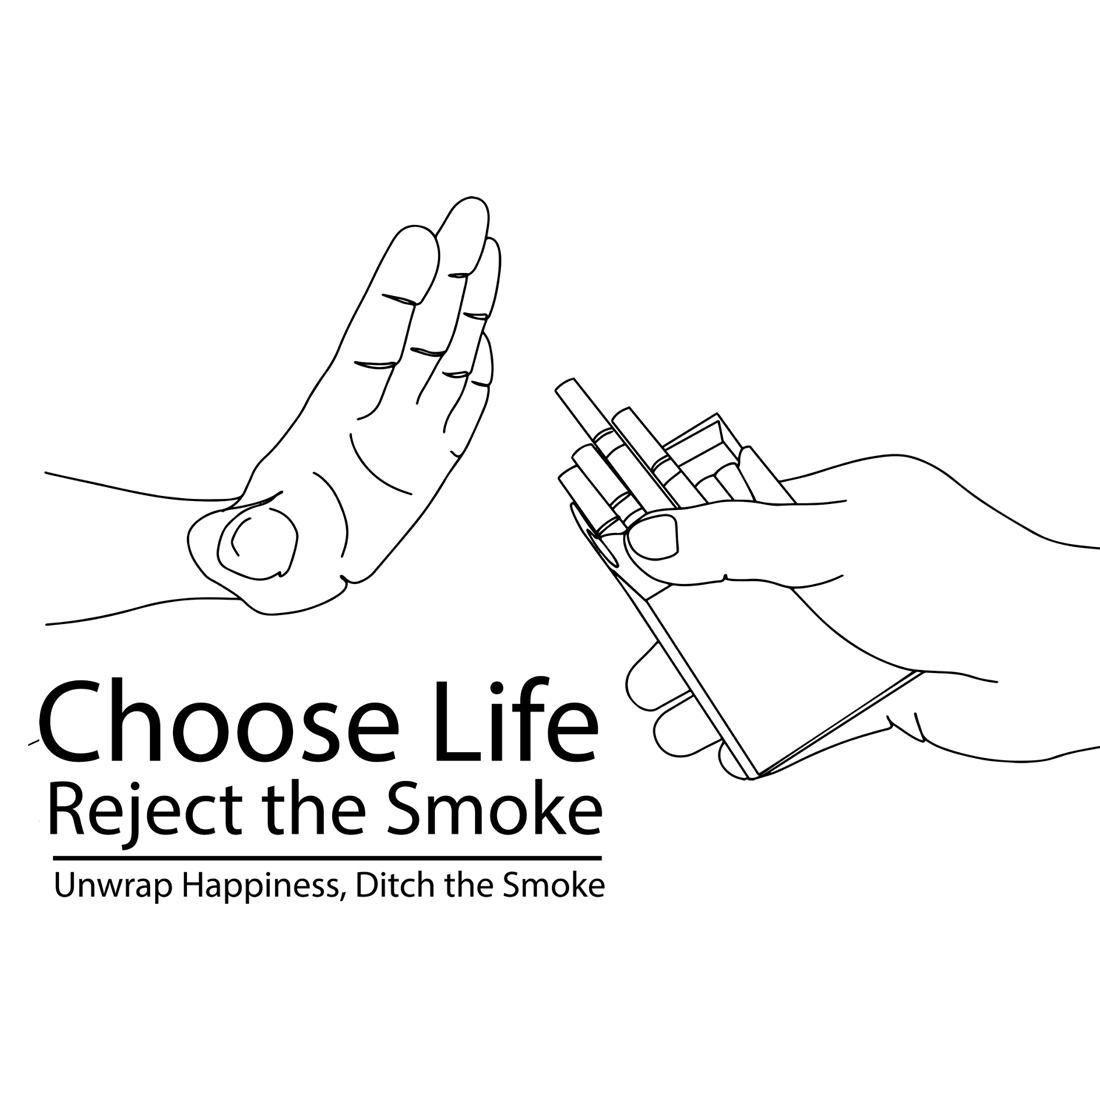 World No Tobacco Day Poster: Say No to Smoking "Cartoon Illustration: Hand Rejecting Cigarette" "Quit Smoking Concept: Hand Gesturing No" "No Cigarette Allowed: Anti-Smoking Illustration" cover image.